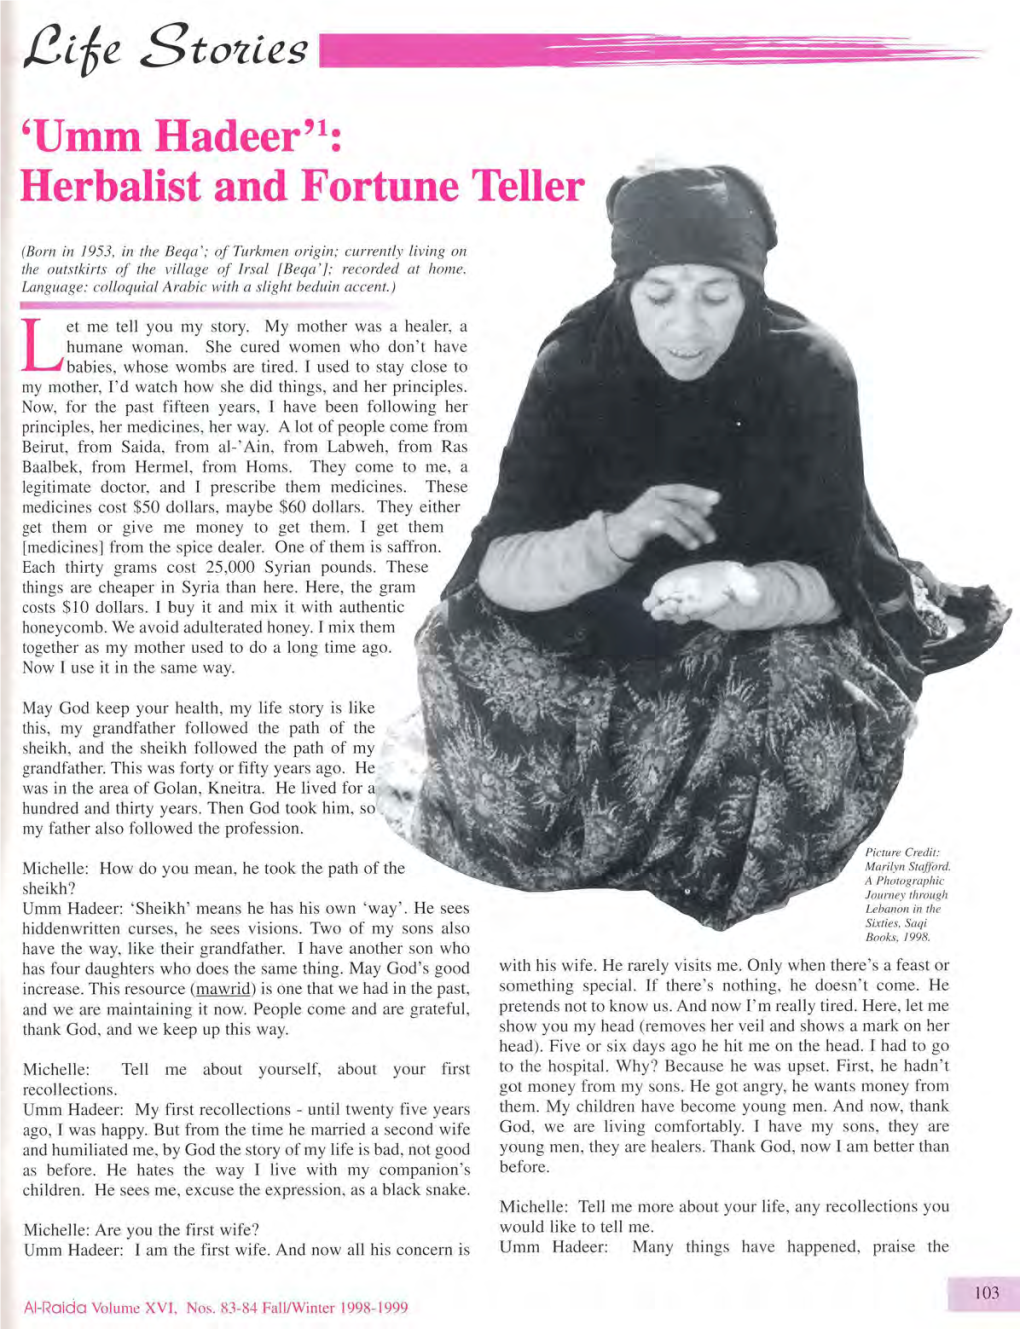 Herbalist and Fortune Teller